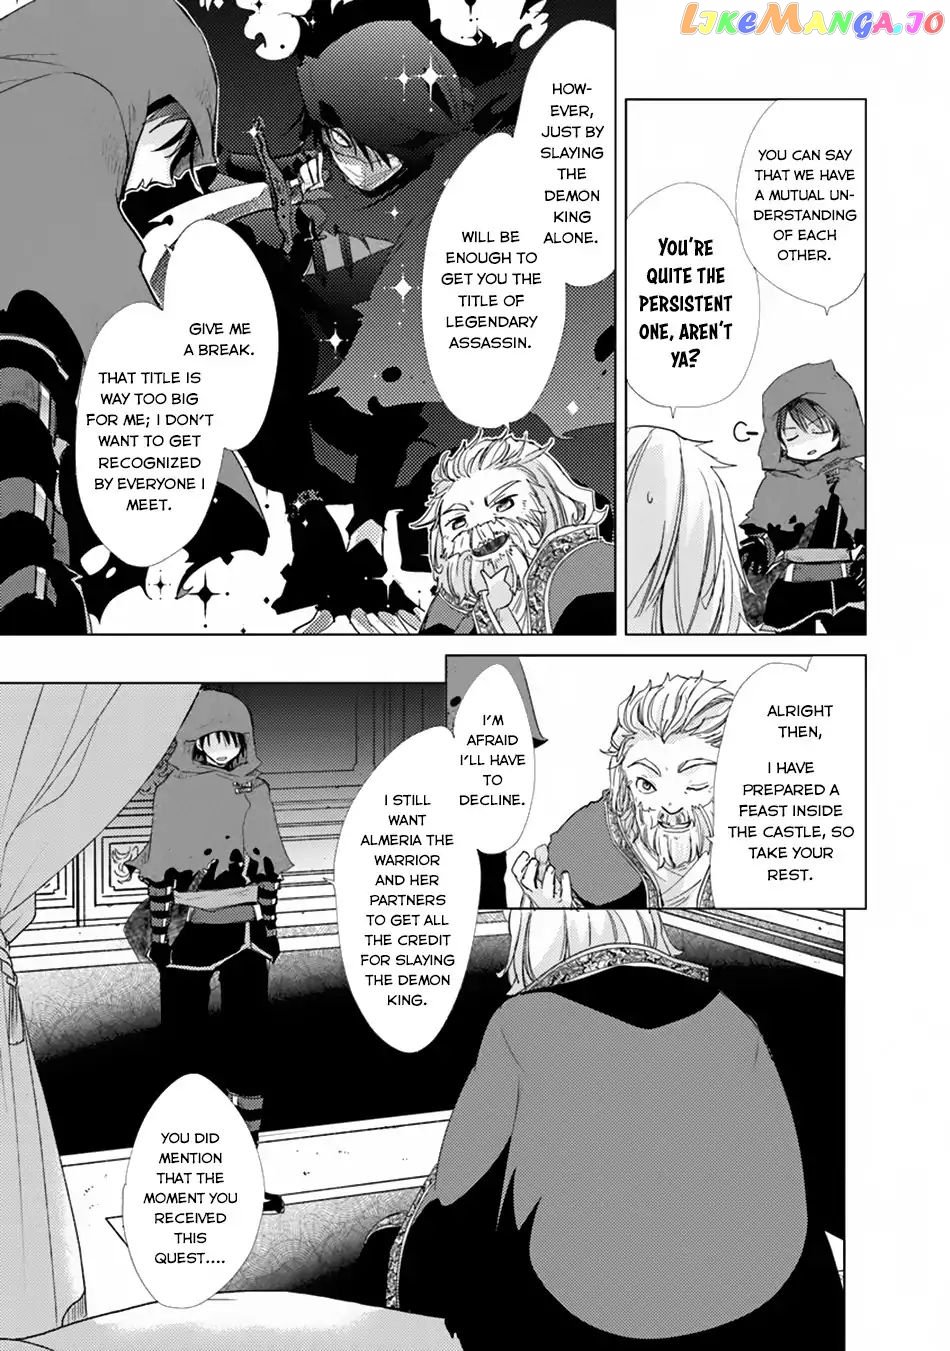 The Guild Official With The Out-of-the-Way Skill “Shadowy” Is, In Fact, The Legendary Assassin chapter 1 - page 27